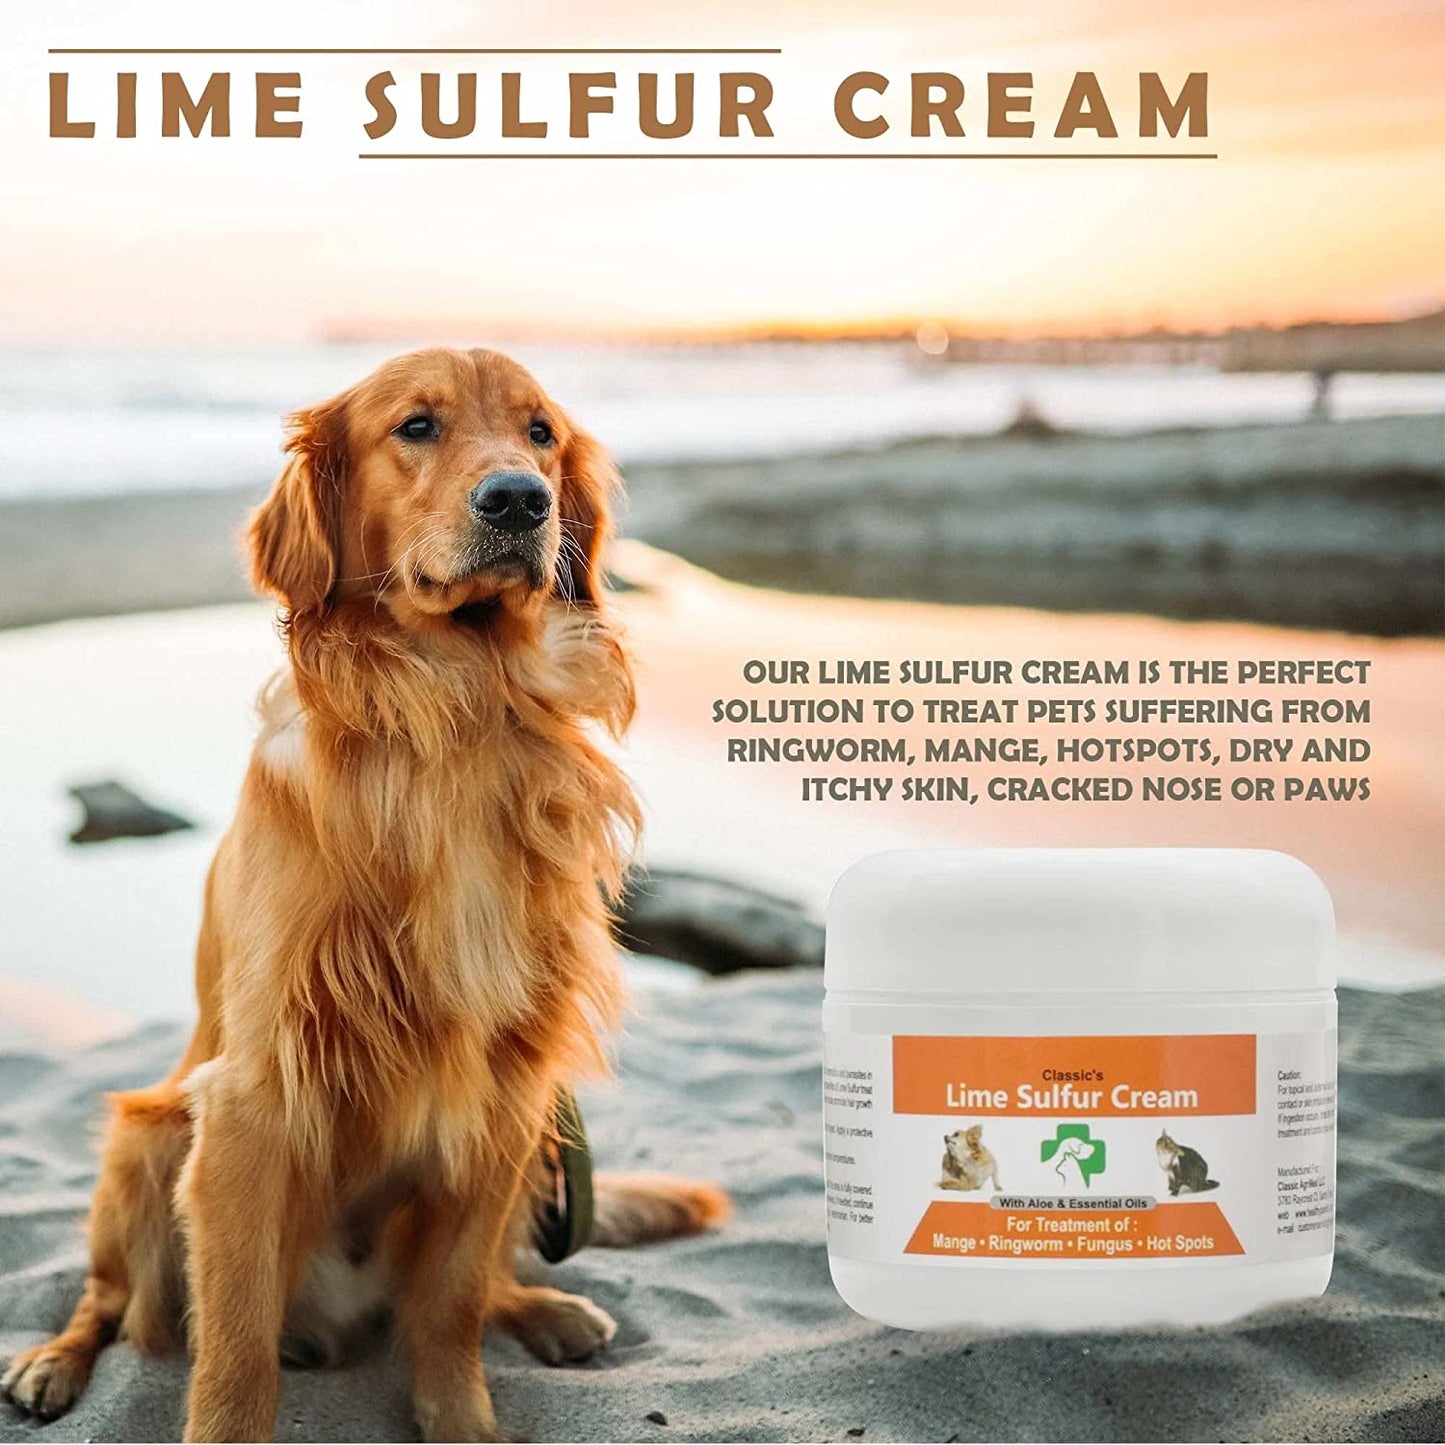 Classic's Lime Sulfur Pet Skin Cream Pet Care and Veterinary Treatment